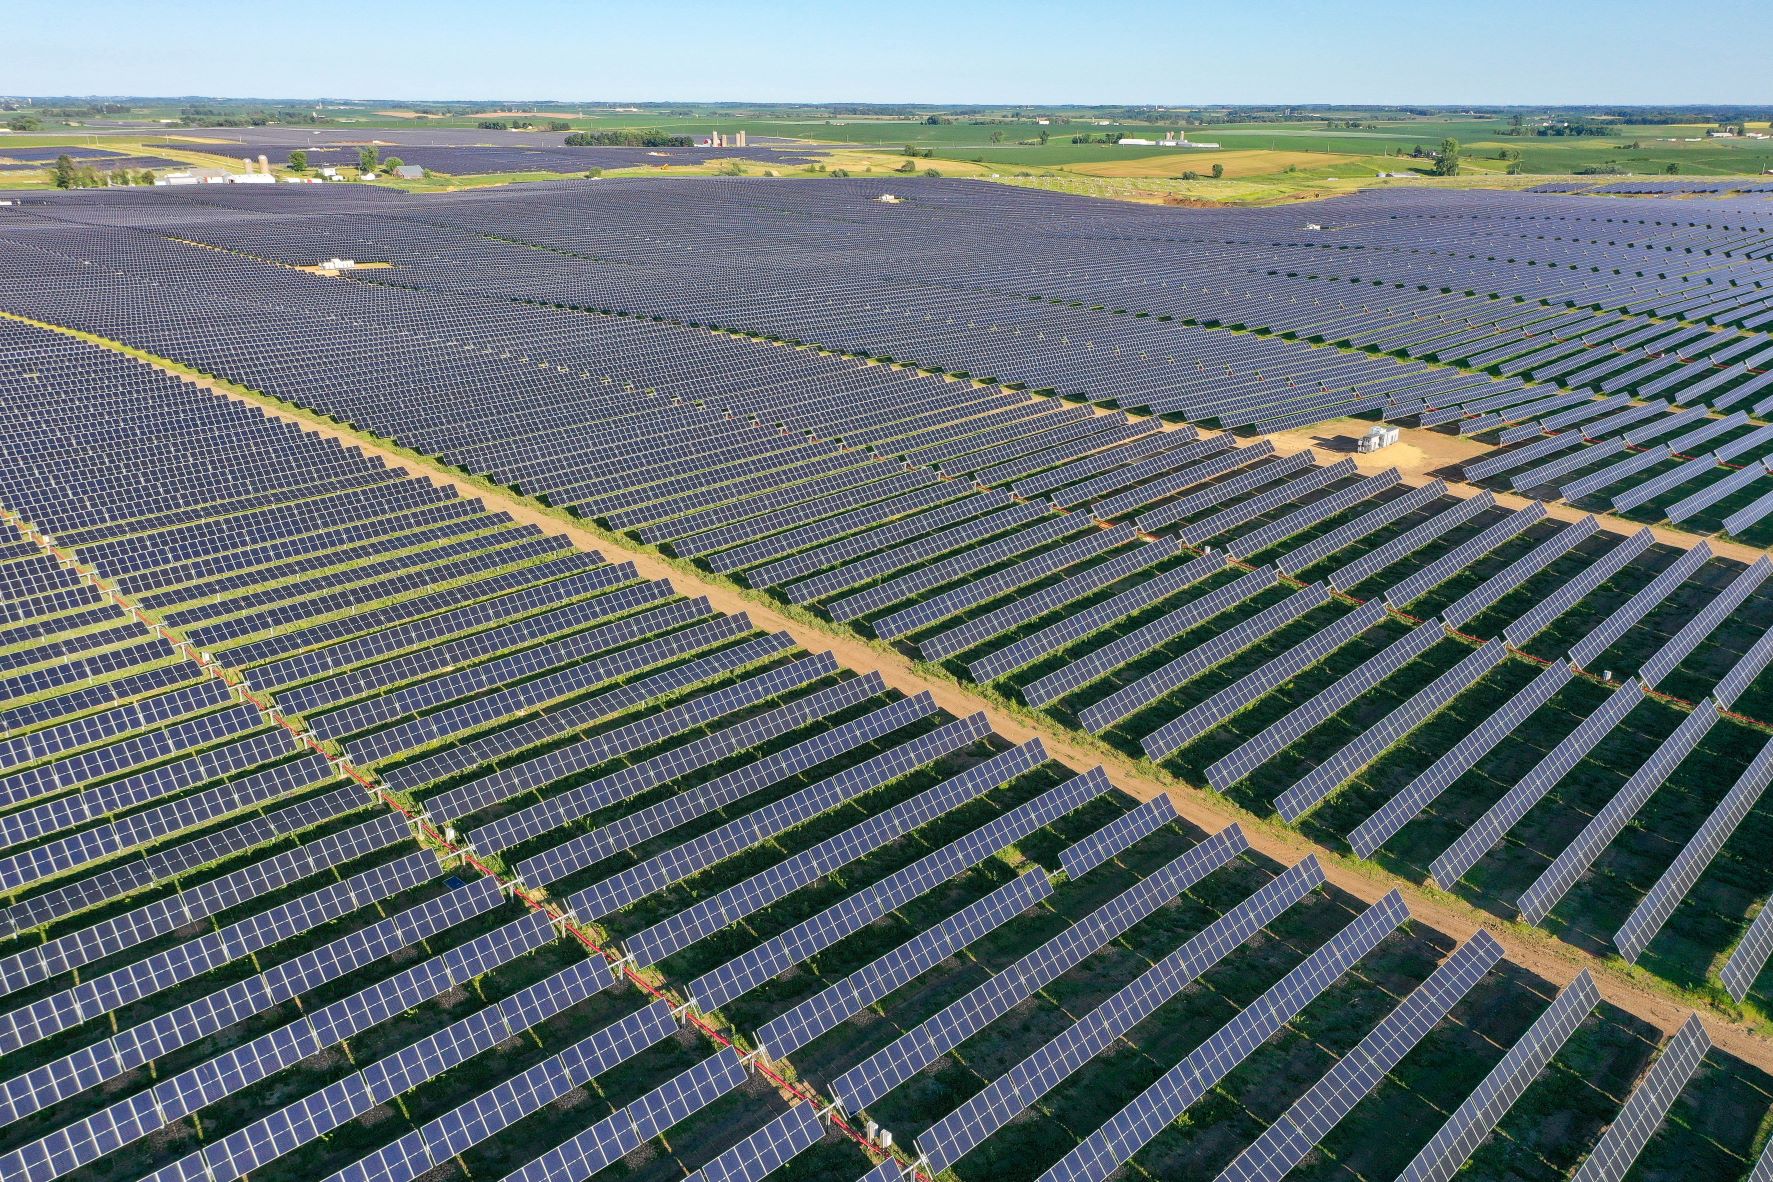 A view of some of the nearly 500,000 solar panels at the first phase of the Badger Hollow Solar Park in southwest Wisconsin.